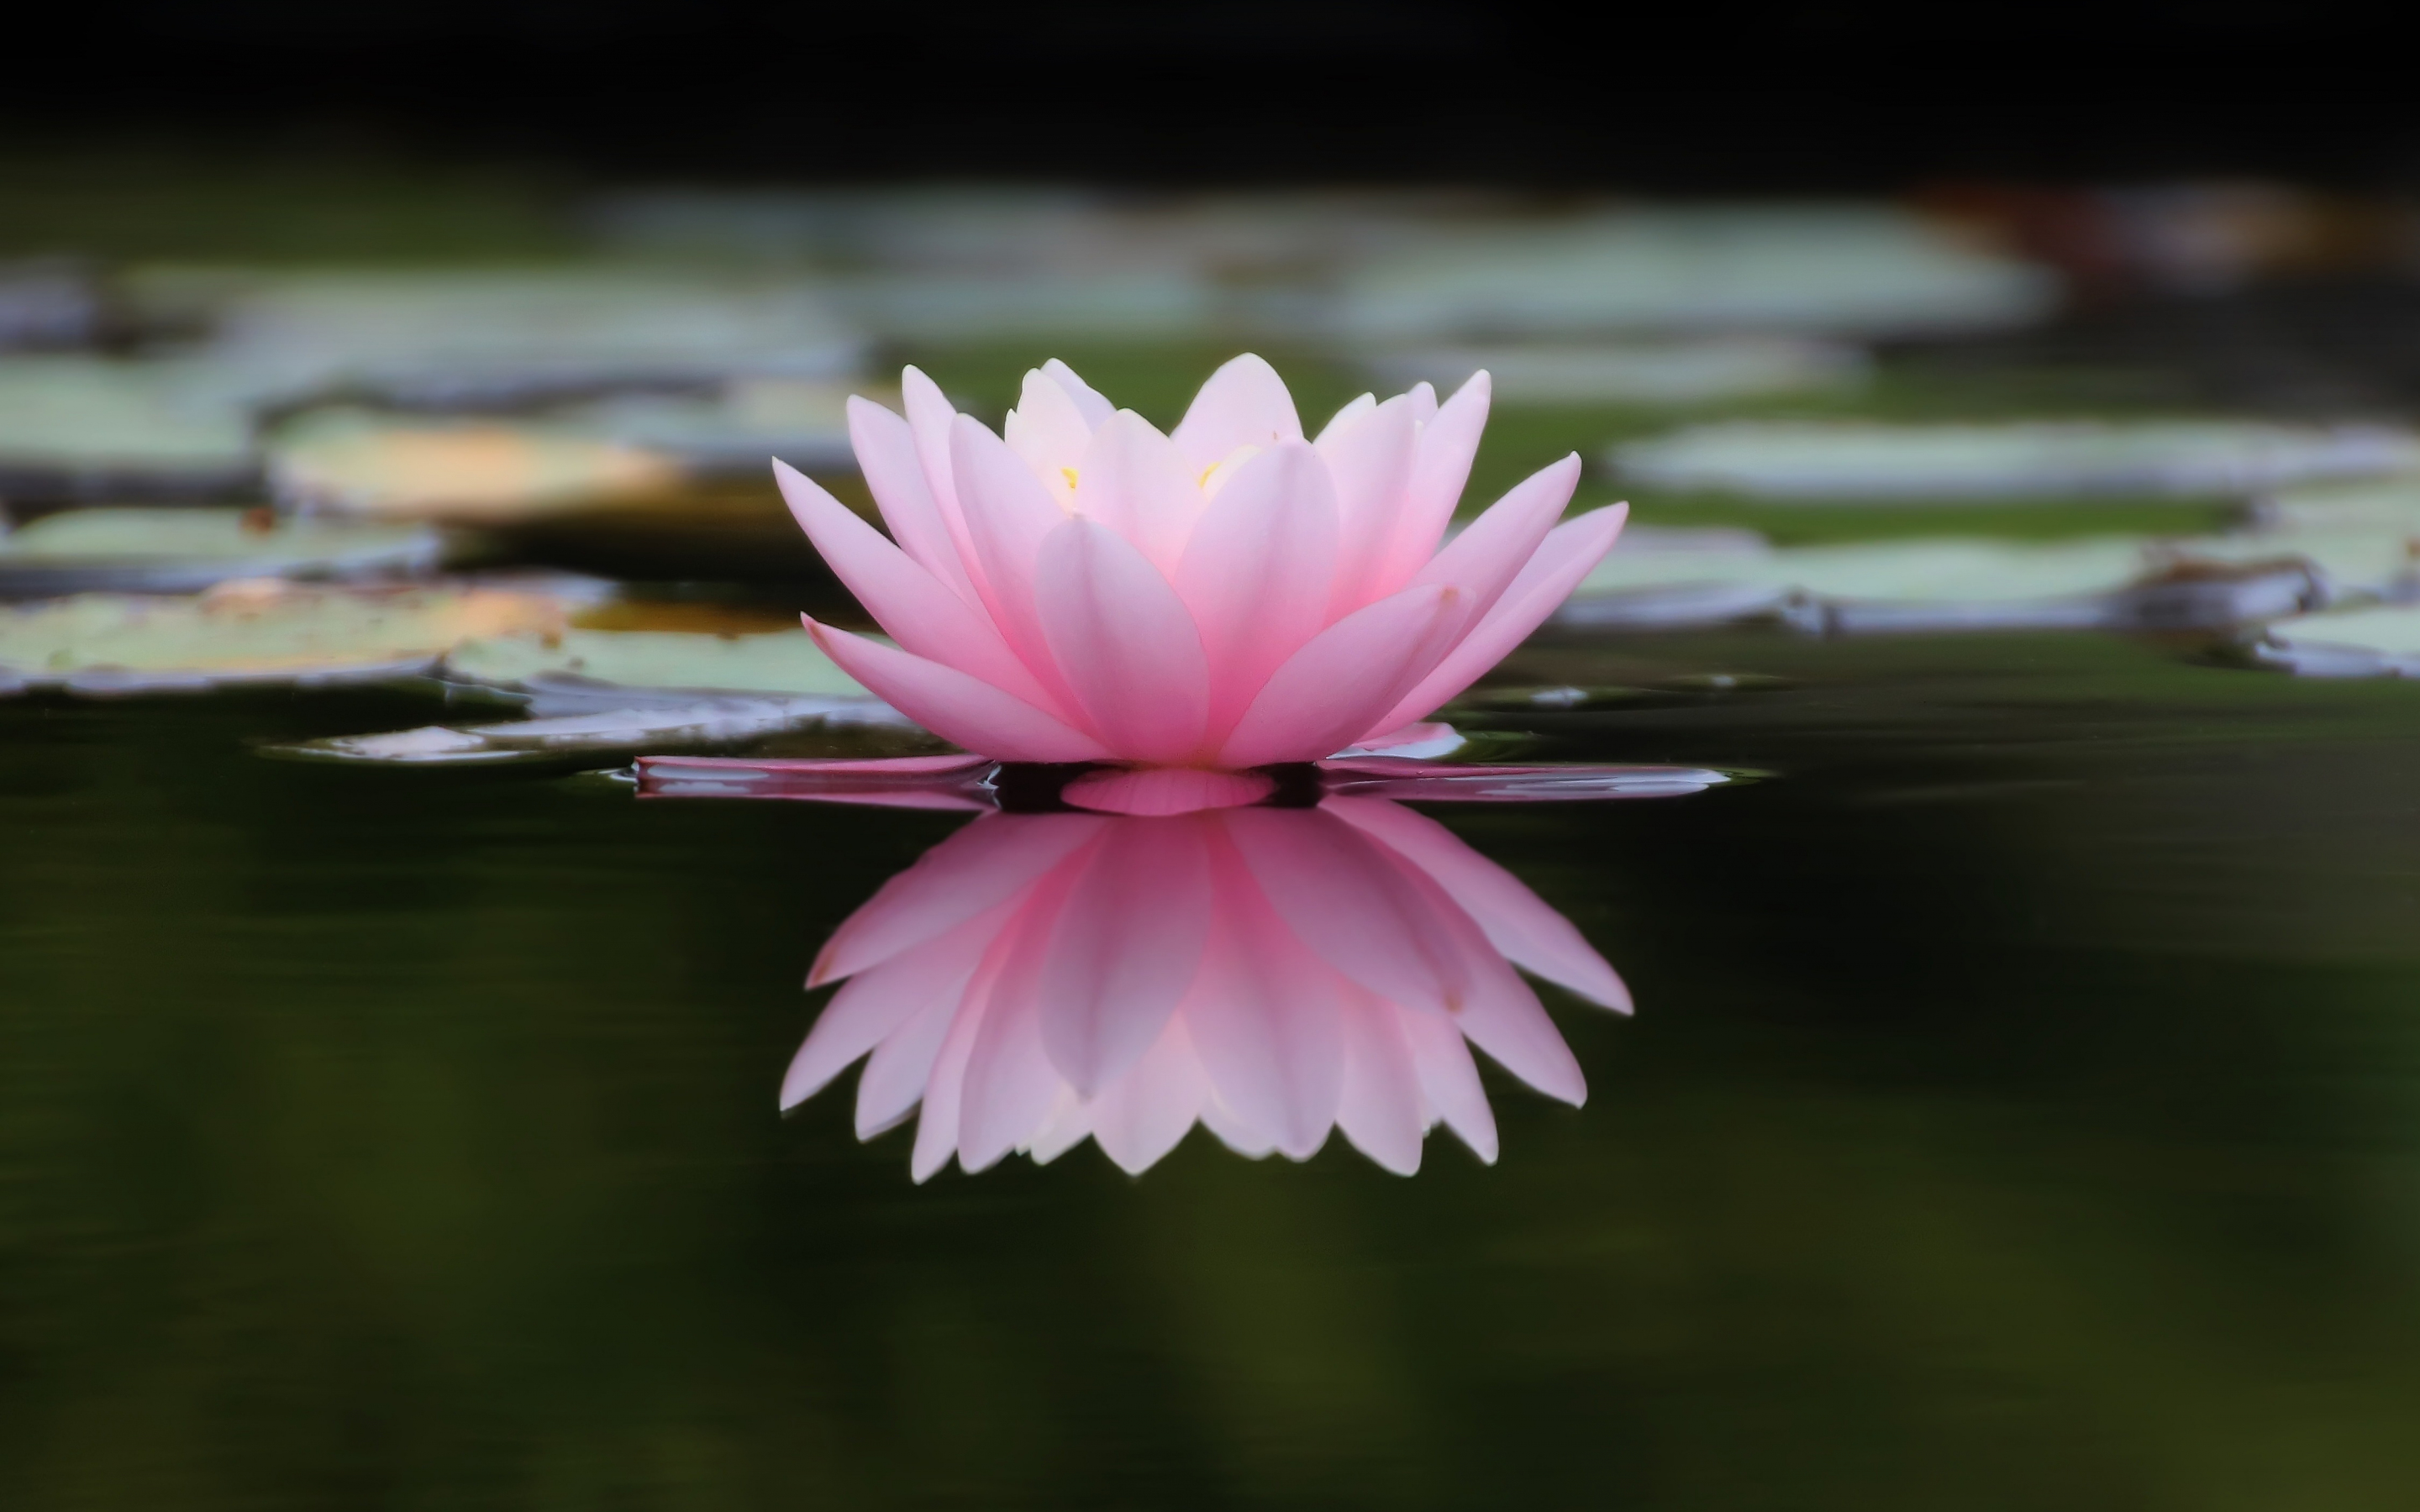 Lake, flower, pink water lily, reflections, 2880x1800 wallpaper